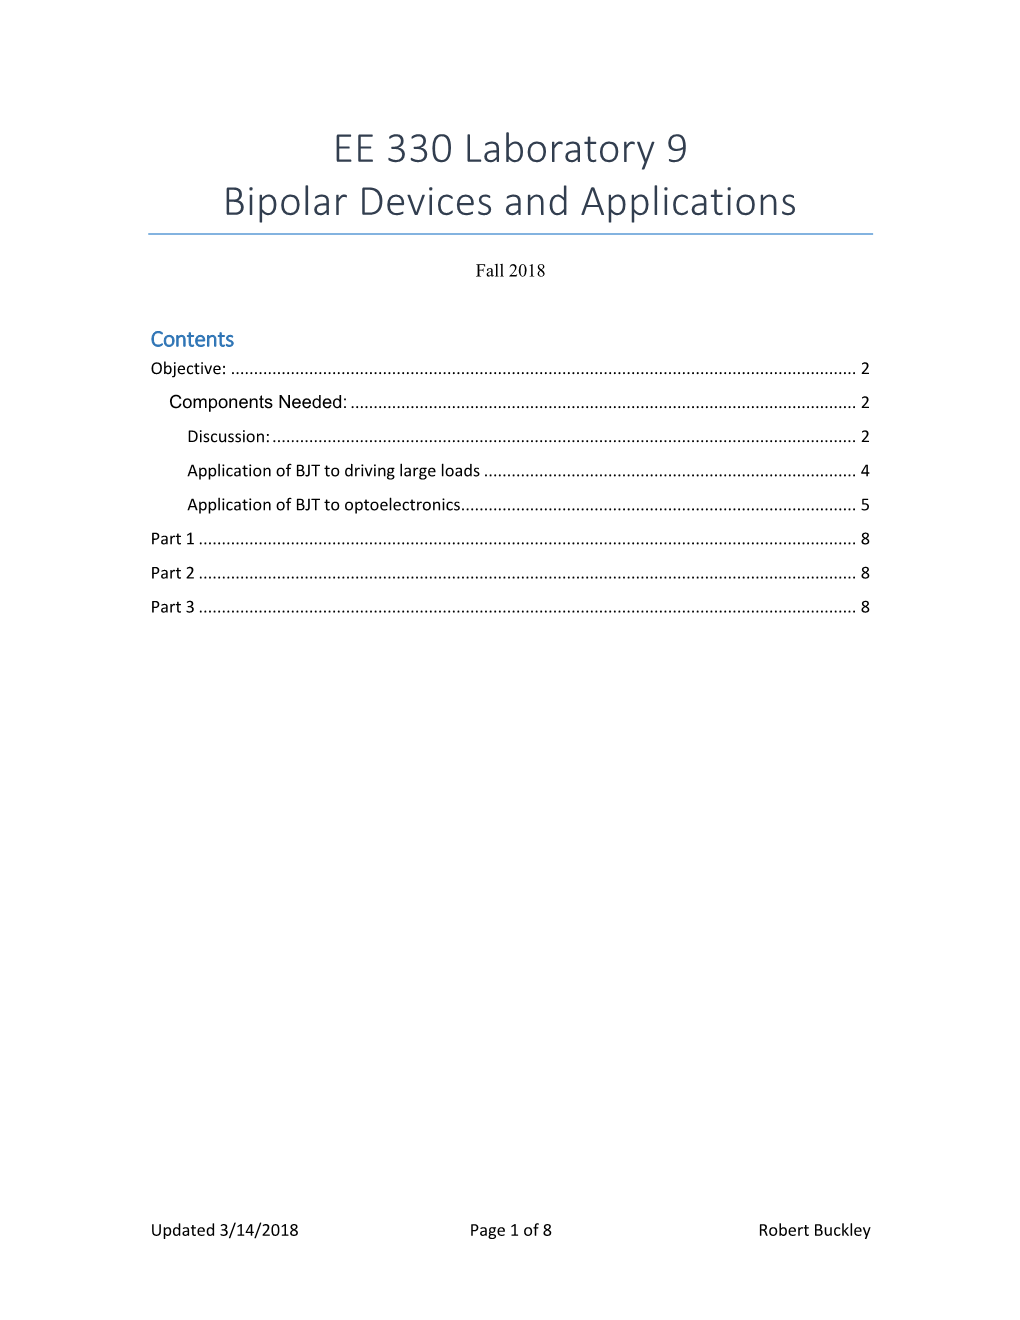 EE 330 Laboratory 9 Bipolar Devices and Applications